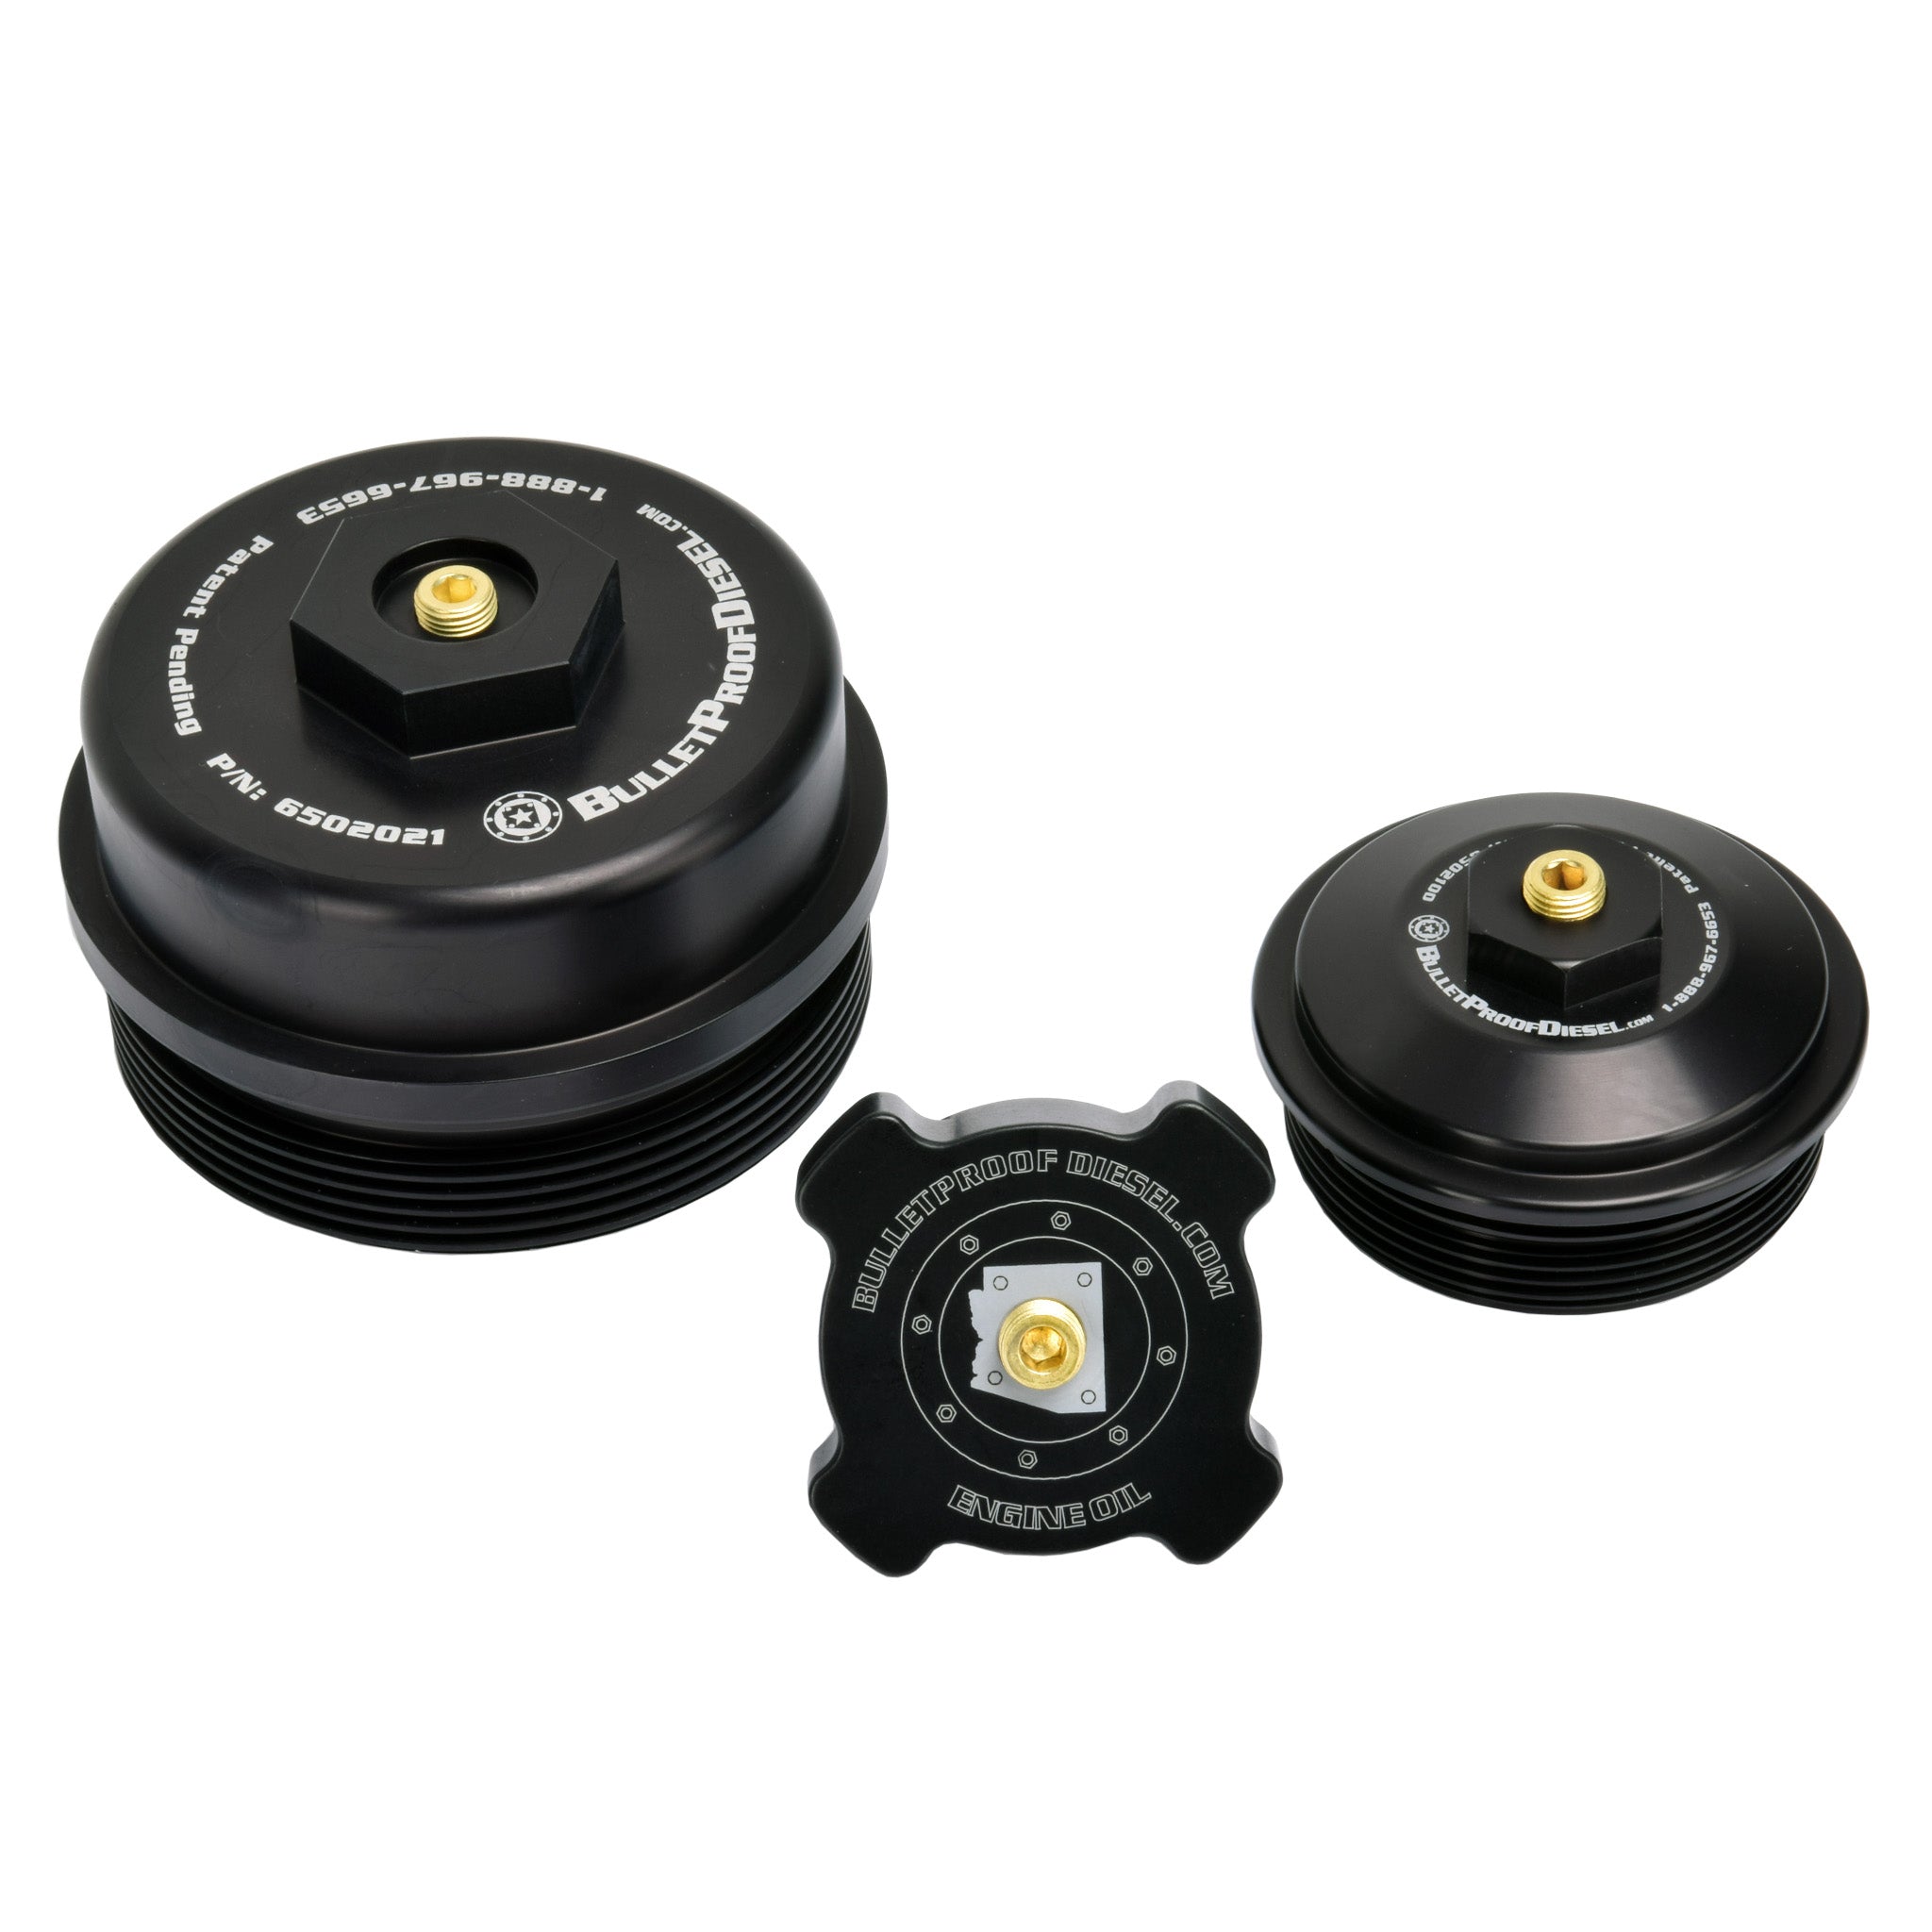 Upgraded Direct Fit Black Anodized Billet Aluminum Oil Filter, Oil Fill, and Lower Fuel Rail Cap Caps Set for the Ford Power Stroke 6.0L Diesel with 1/8” MPT Threaded Port. Fits Years 2003 2004 2005 2006 2007.